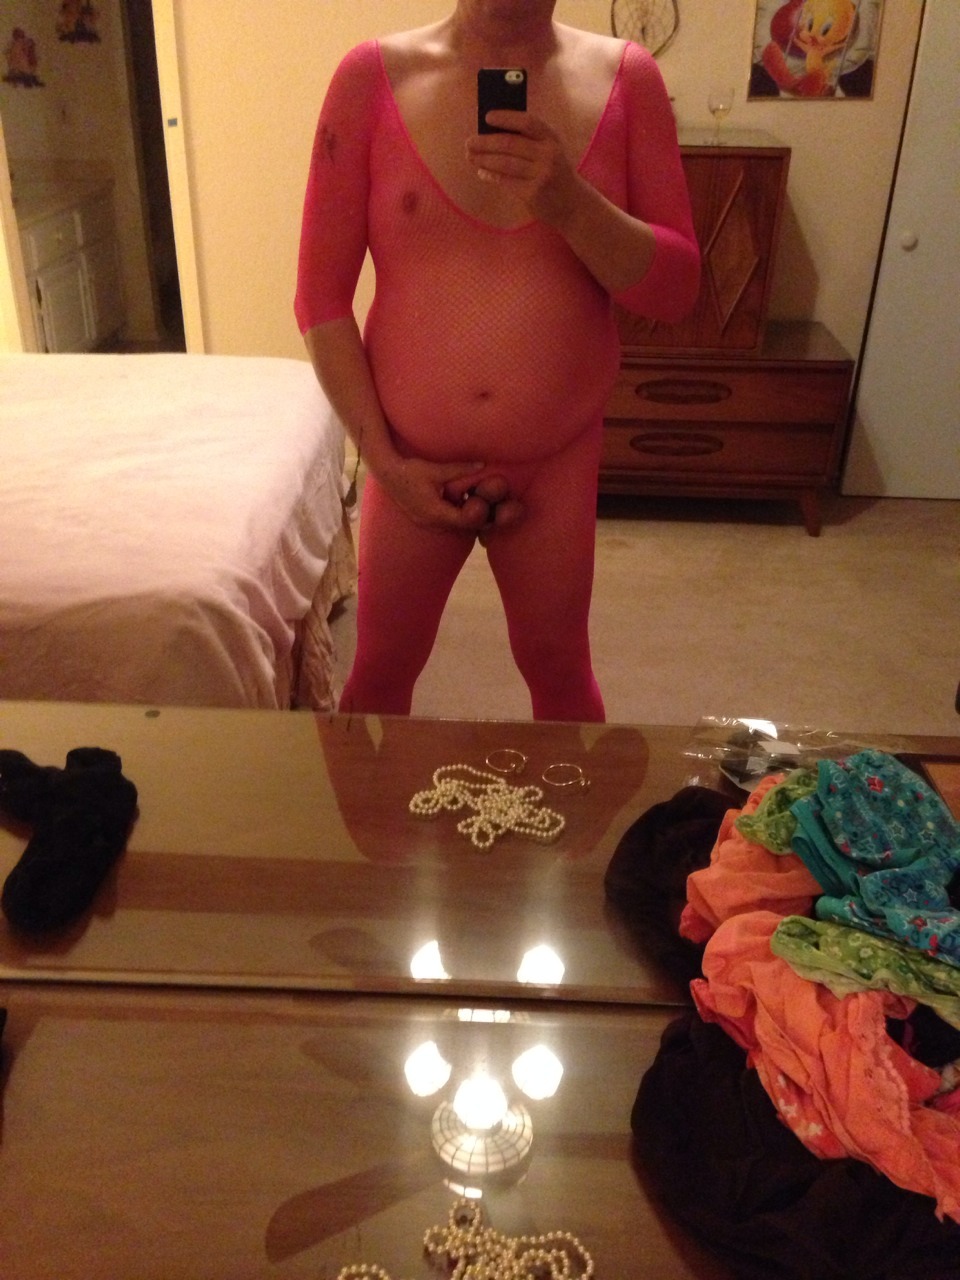 Decided on pink crotchless body suit and leather cock &amp; ball tuxedo as appropriate